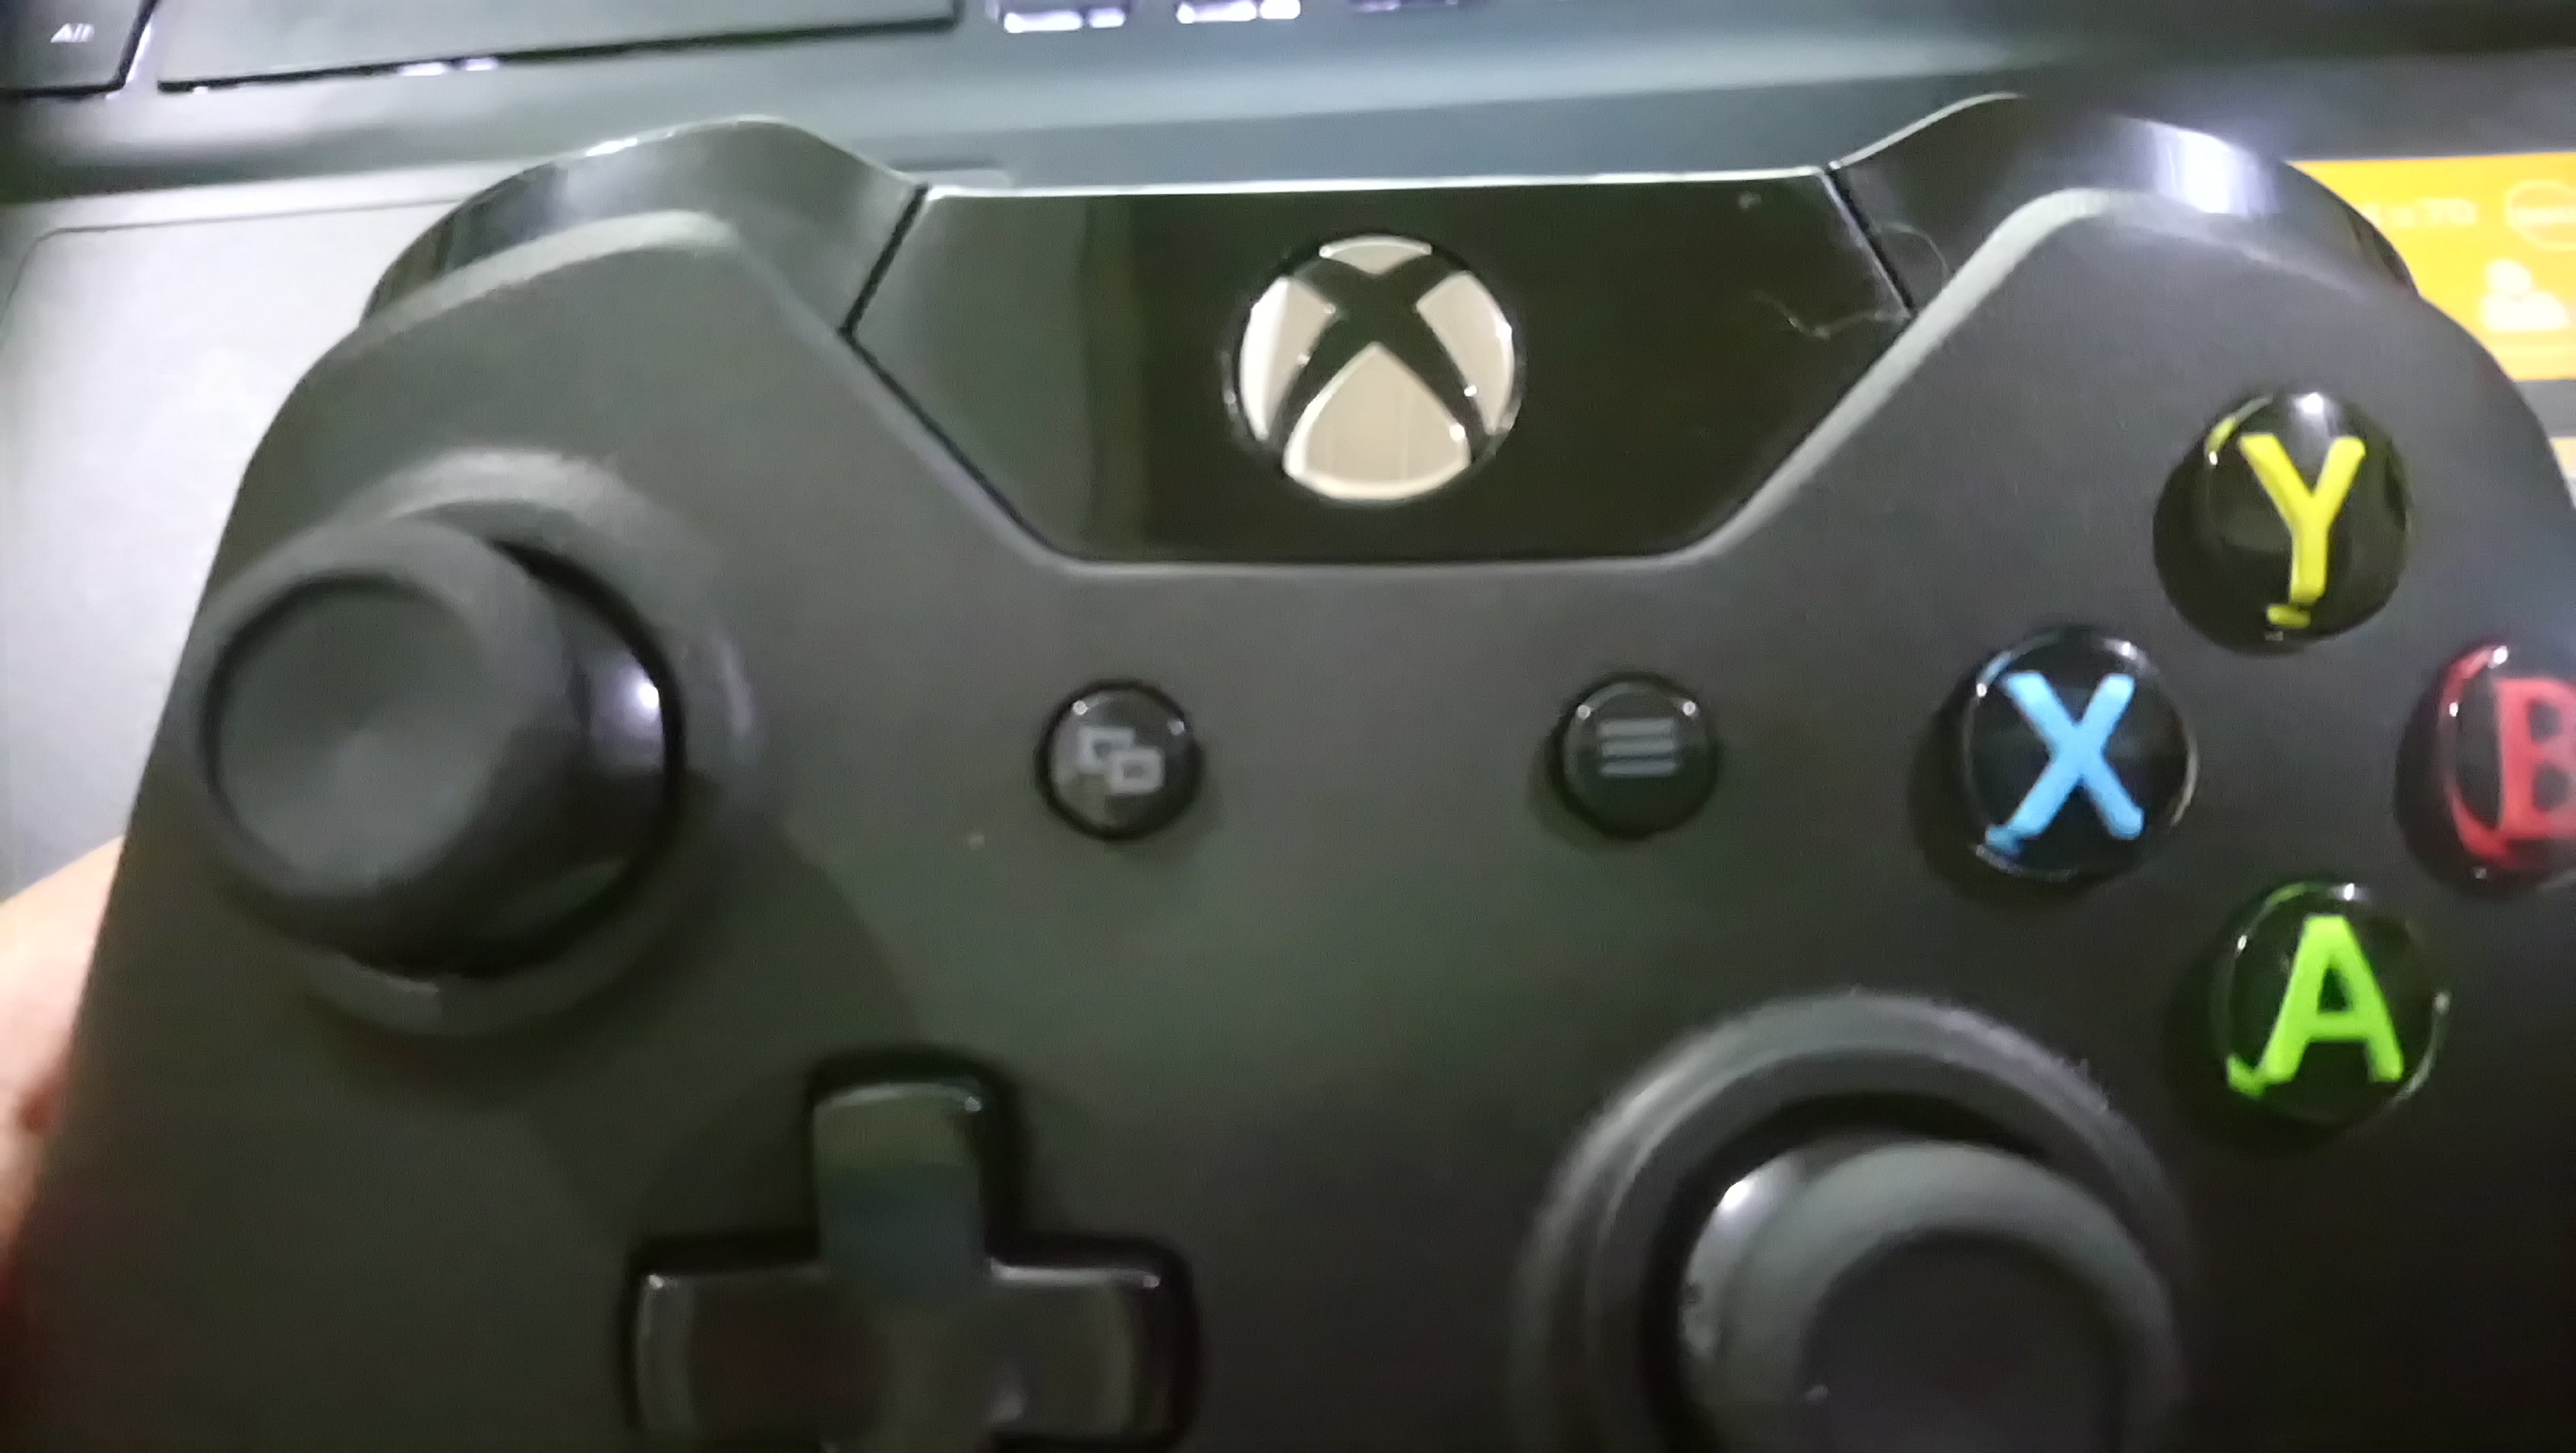 xbox one model 1708 controller